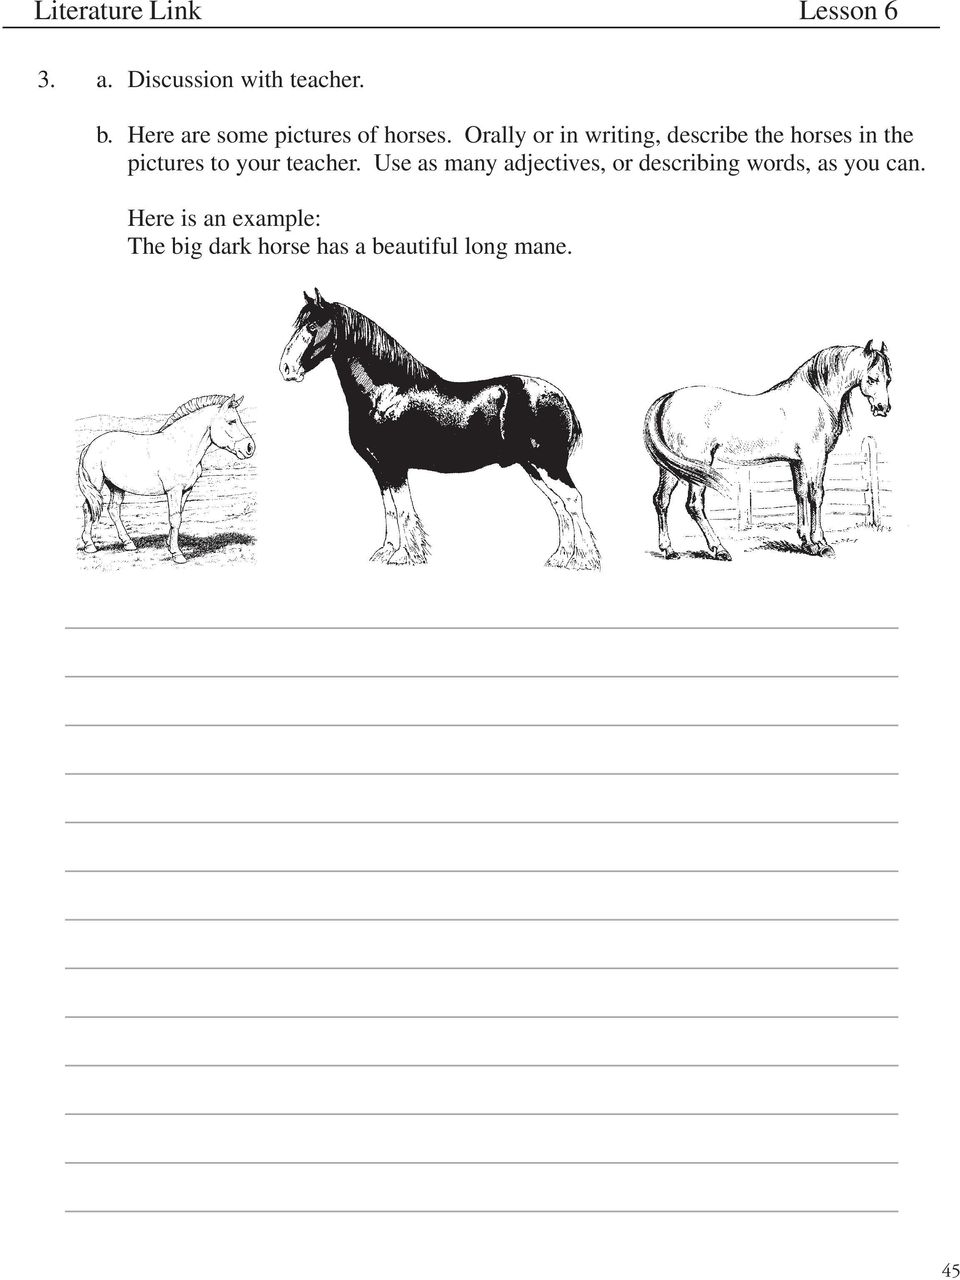 Orally or in writing, describe the horses in the pictures to your teacher.